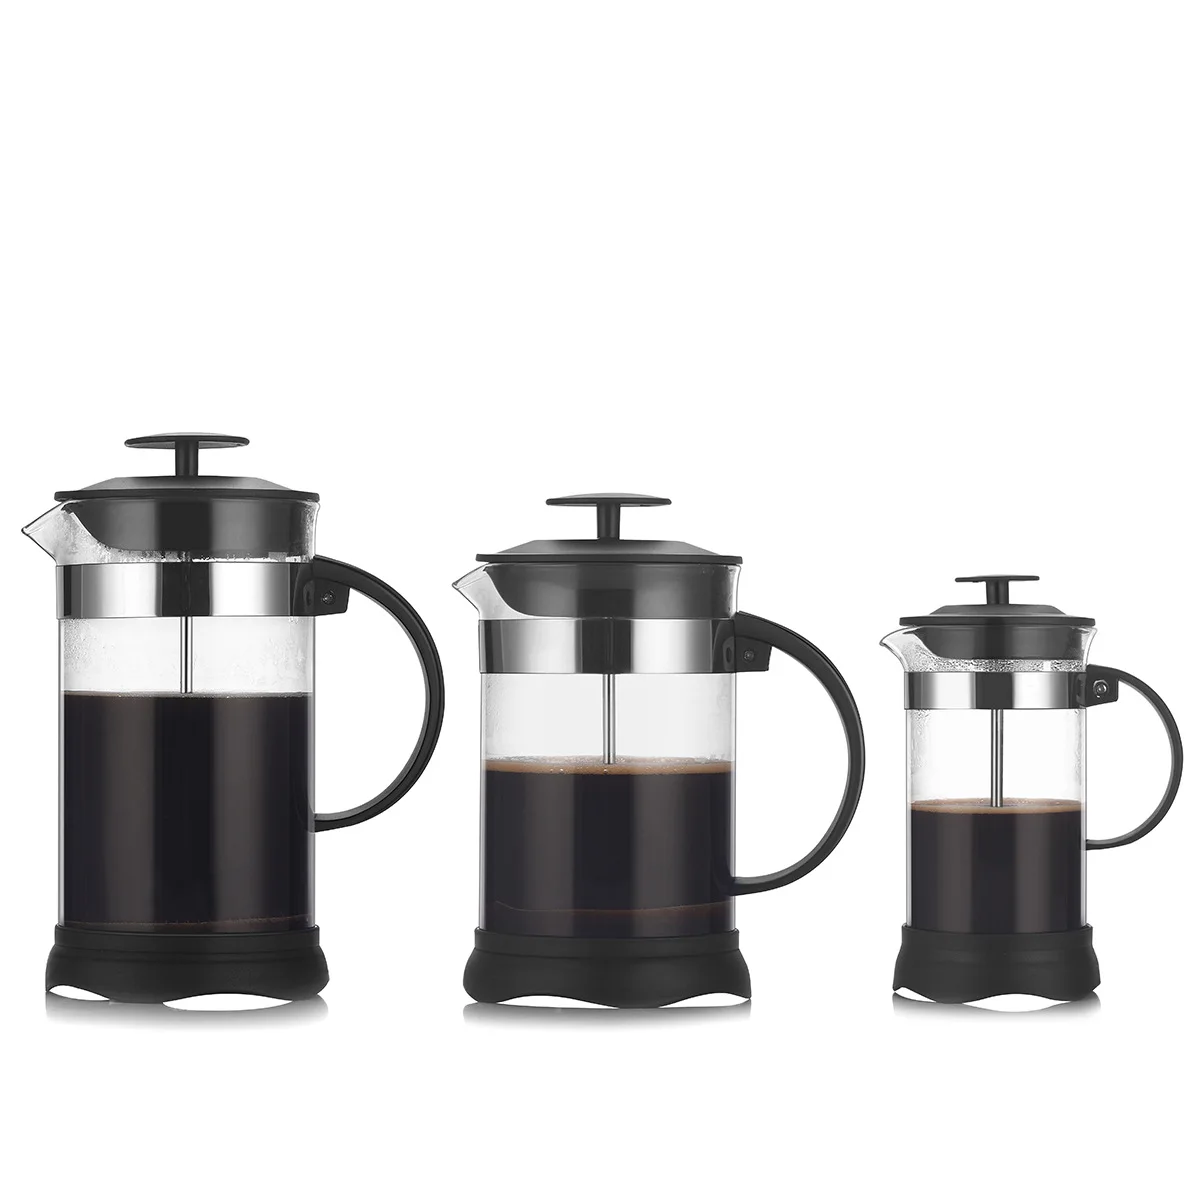 1000ml Glass Coffee Pots With Stainelss Steel Filter Coffee Percolators Heat Resistant Coffee Pot Brewer Coffee Kettle 